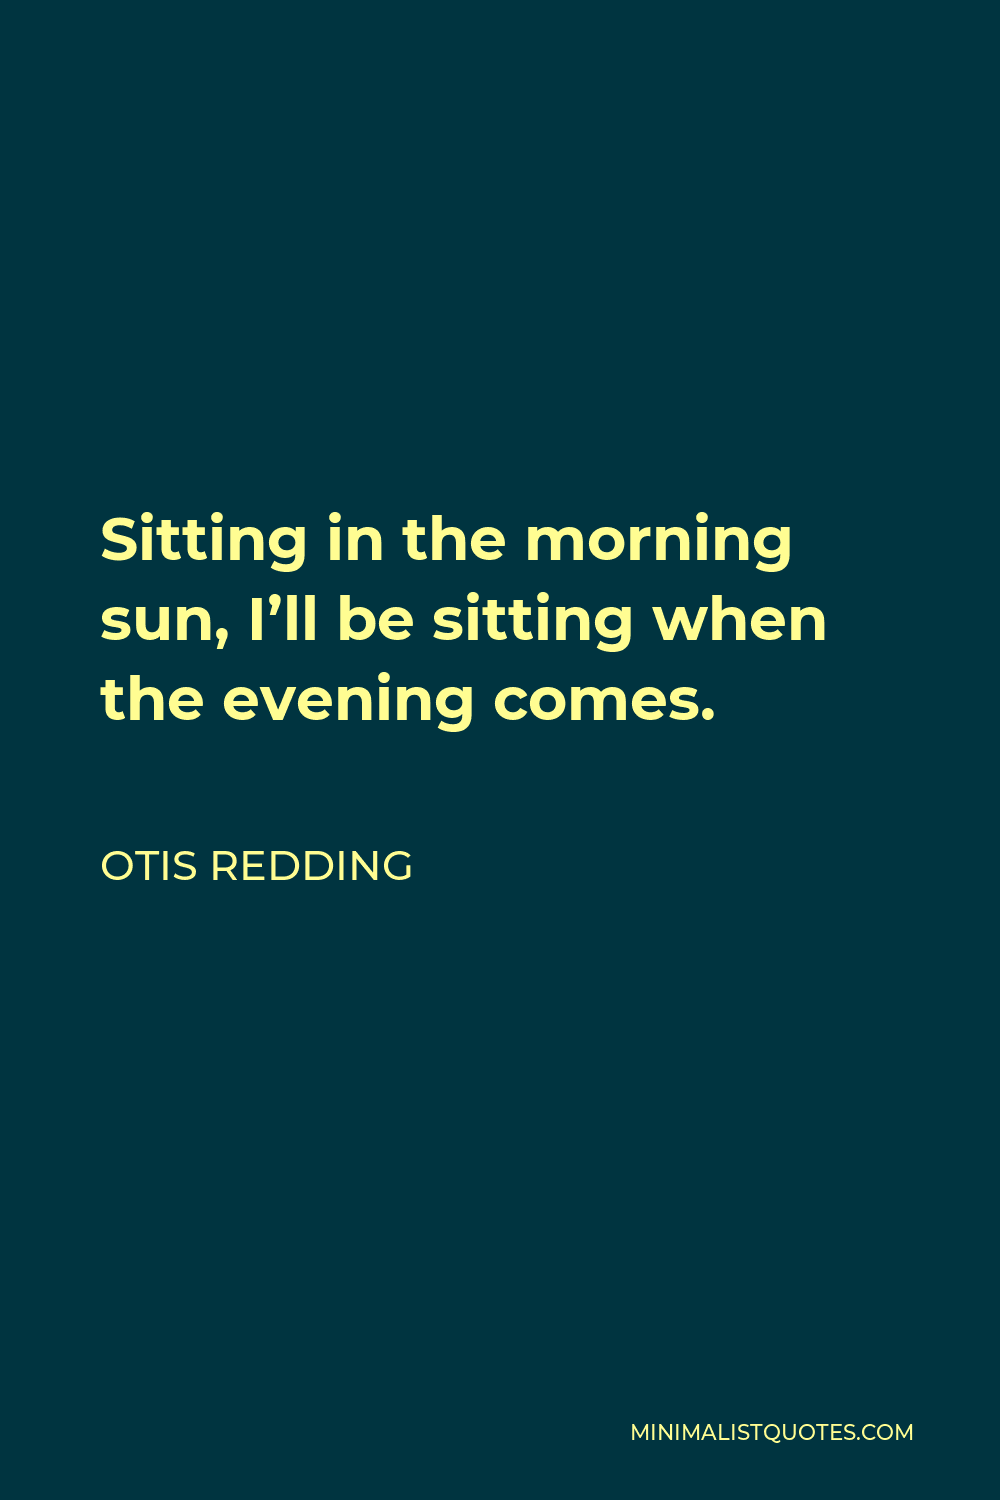 Otis Redding Quote - Sitting in the morning sun, I’ll be sitting when the evening comes.